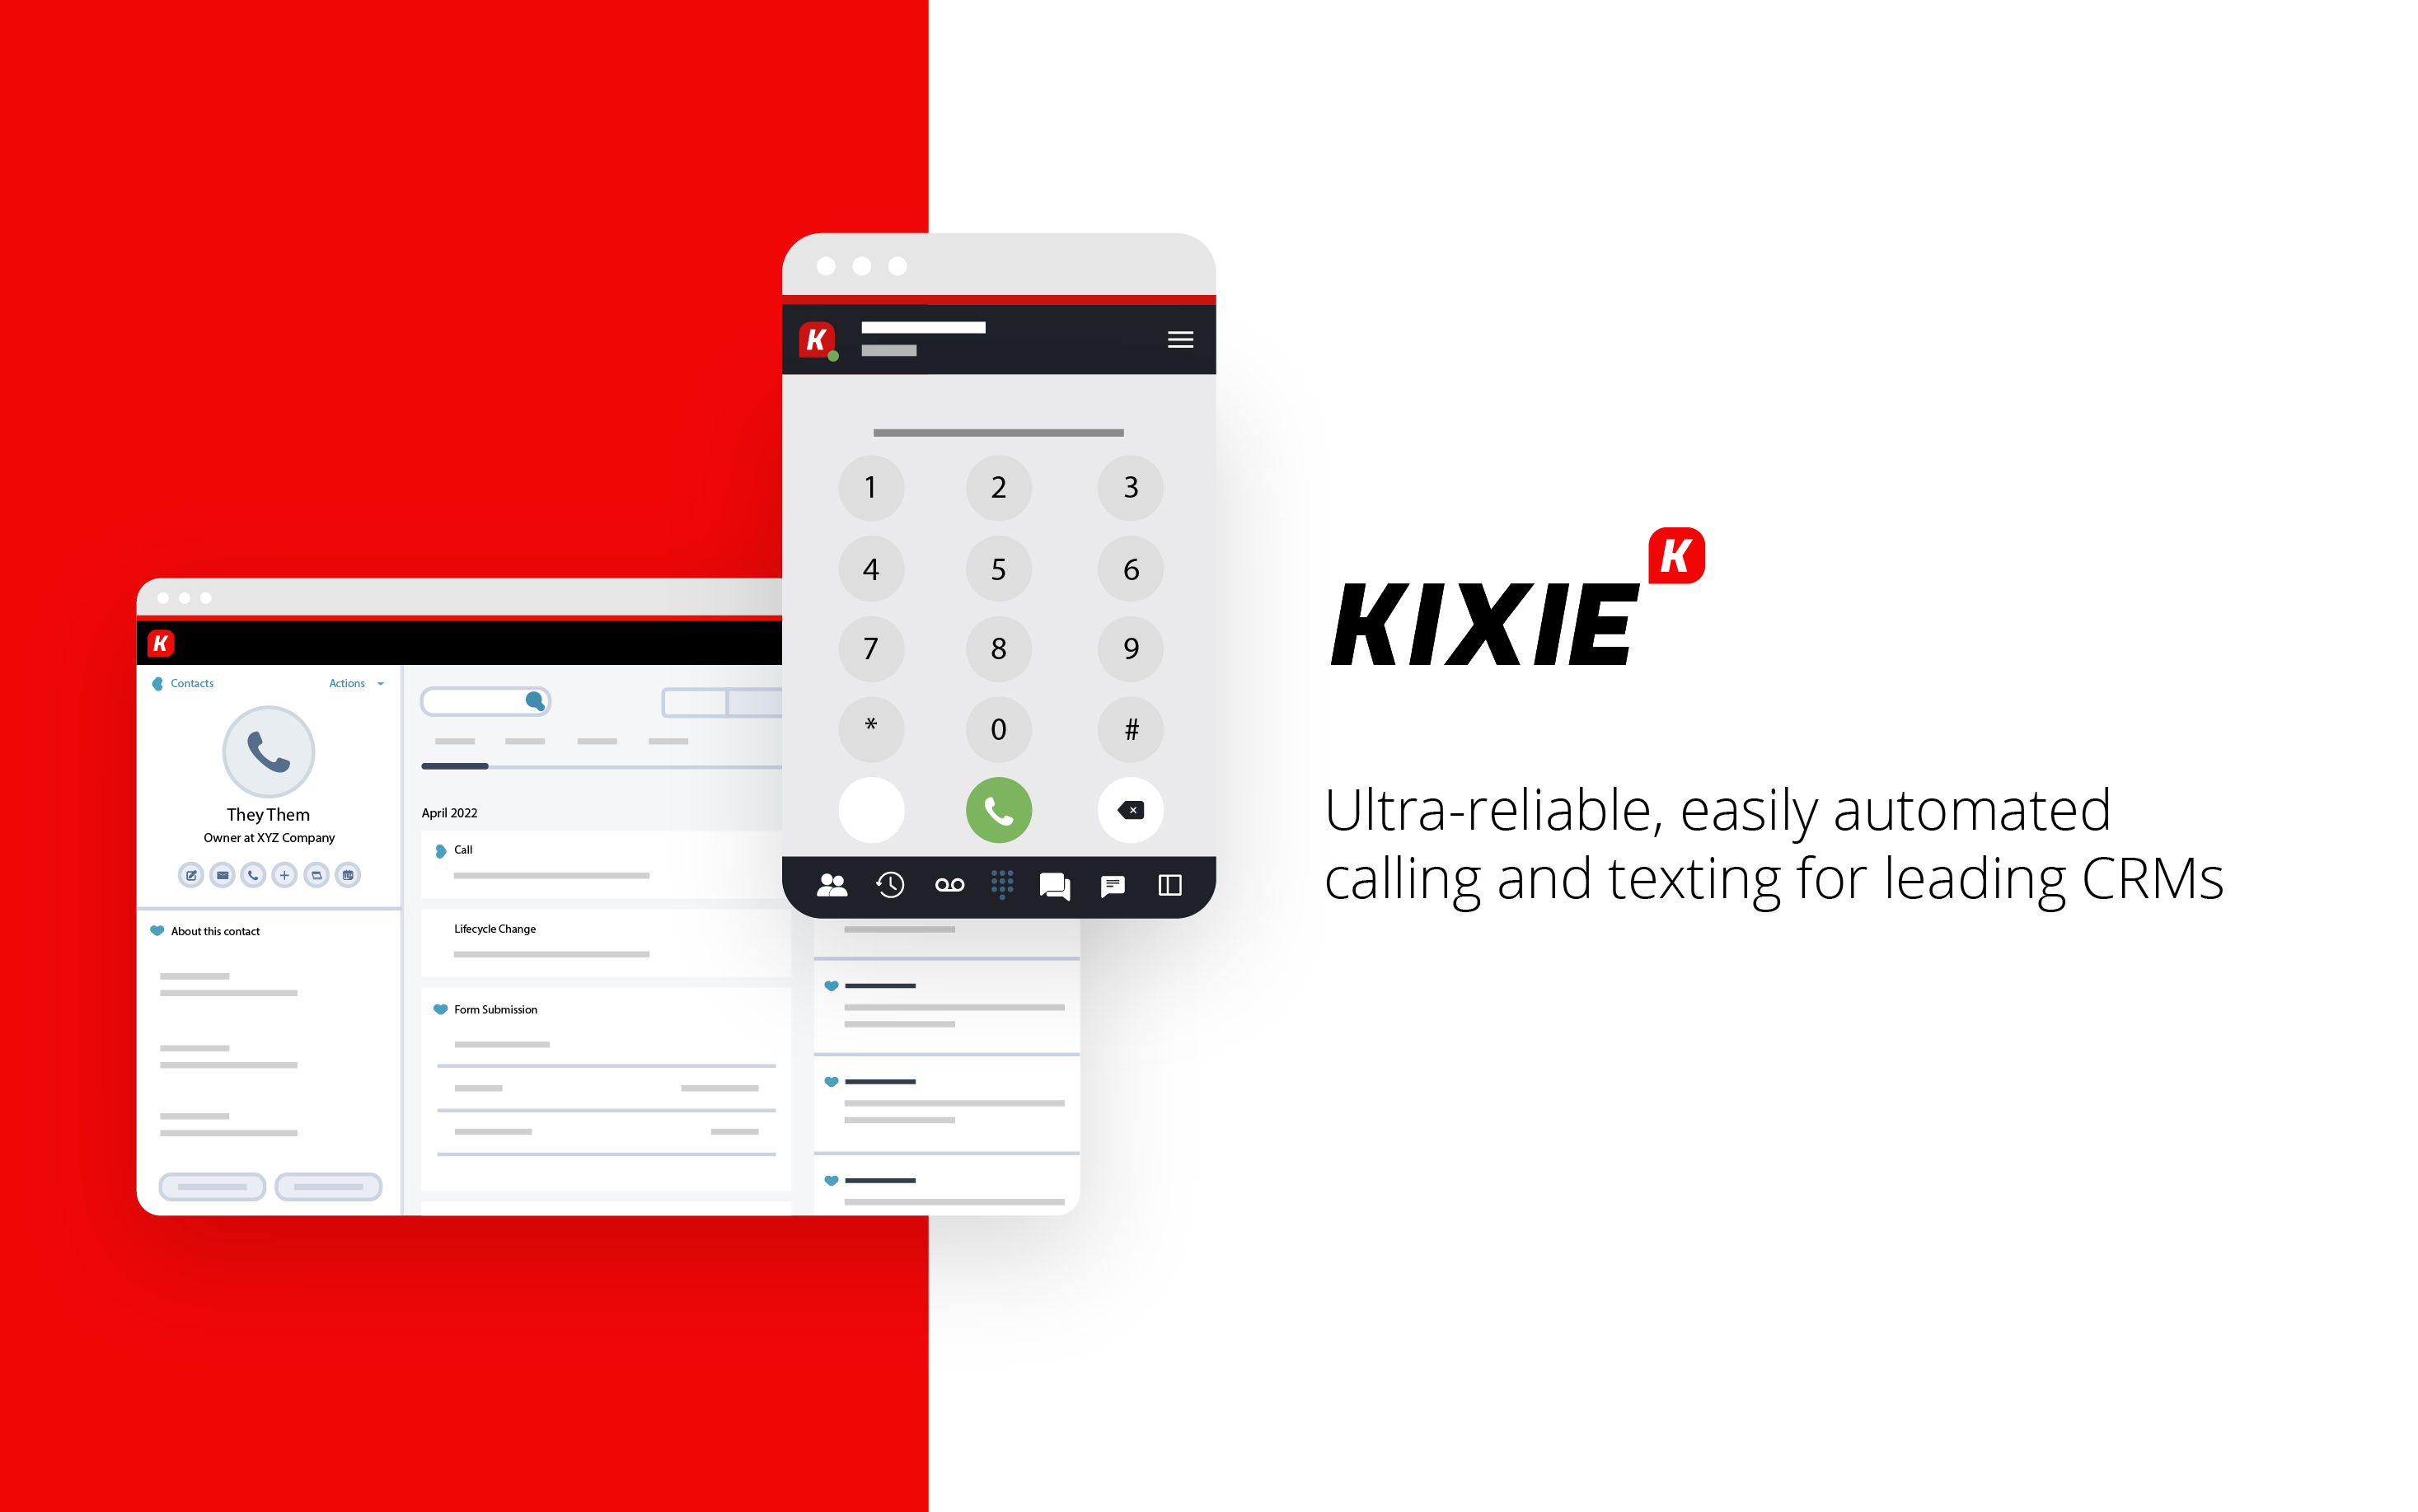 Kixie PowerCall Software - Ultra-reliable calling and texting for all leading CRM.